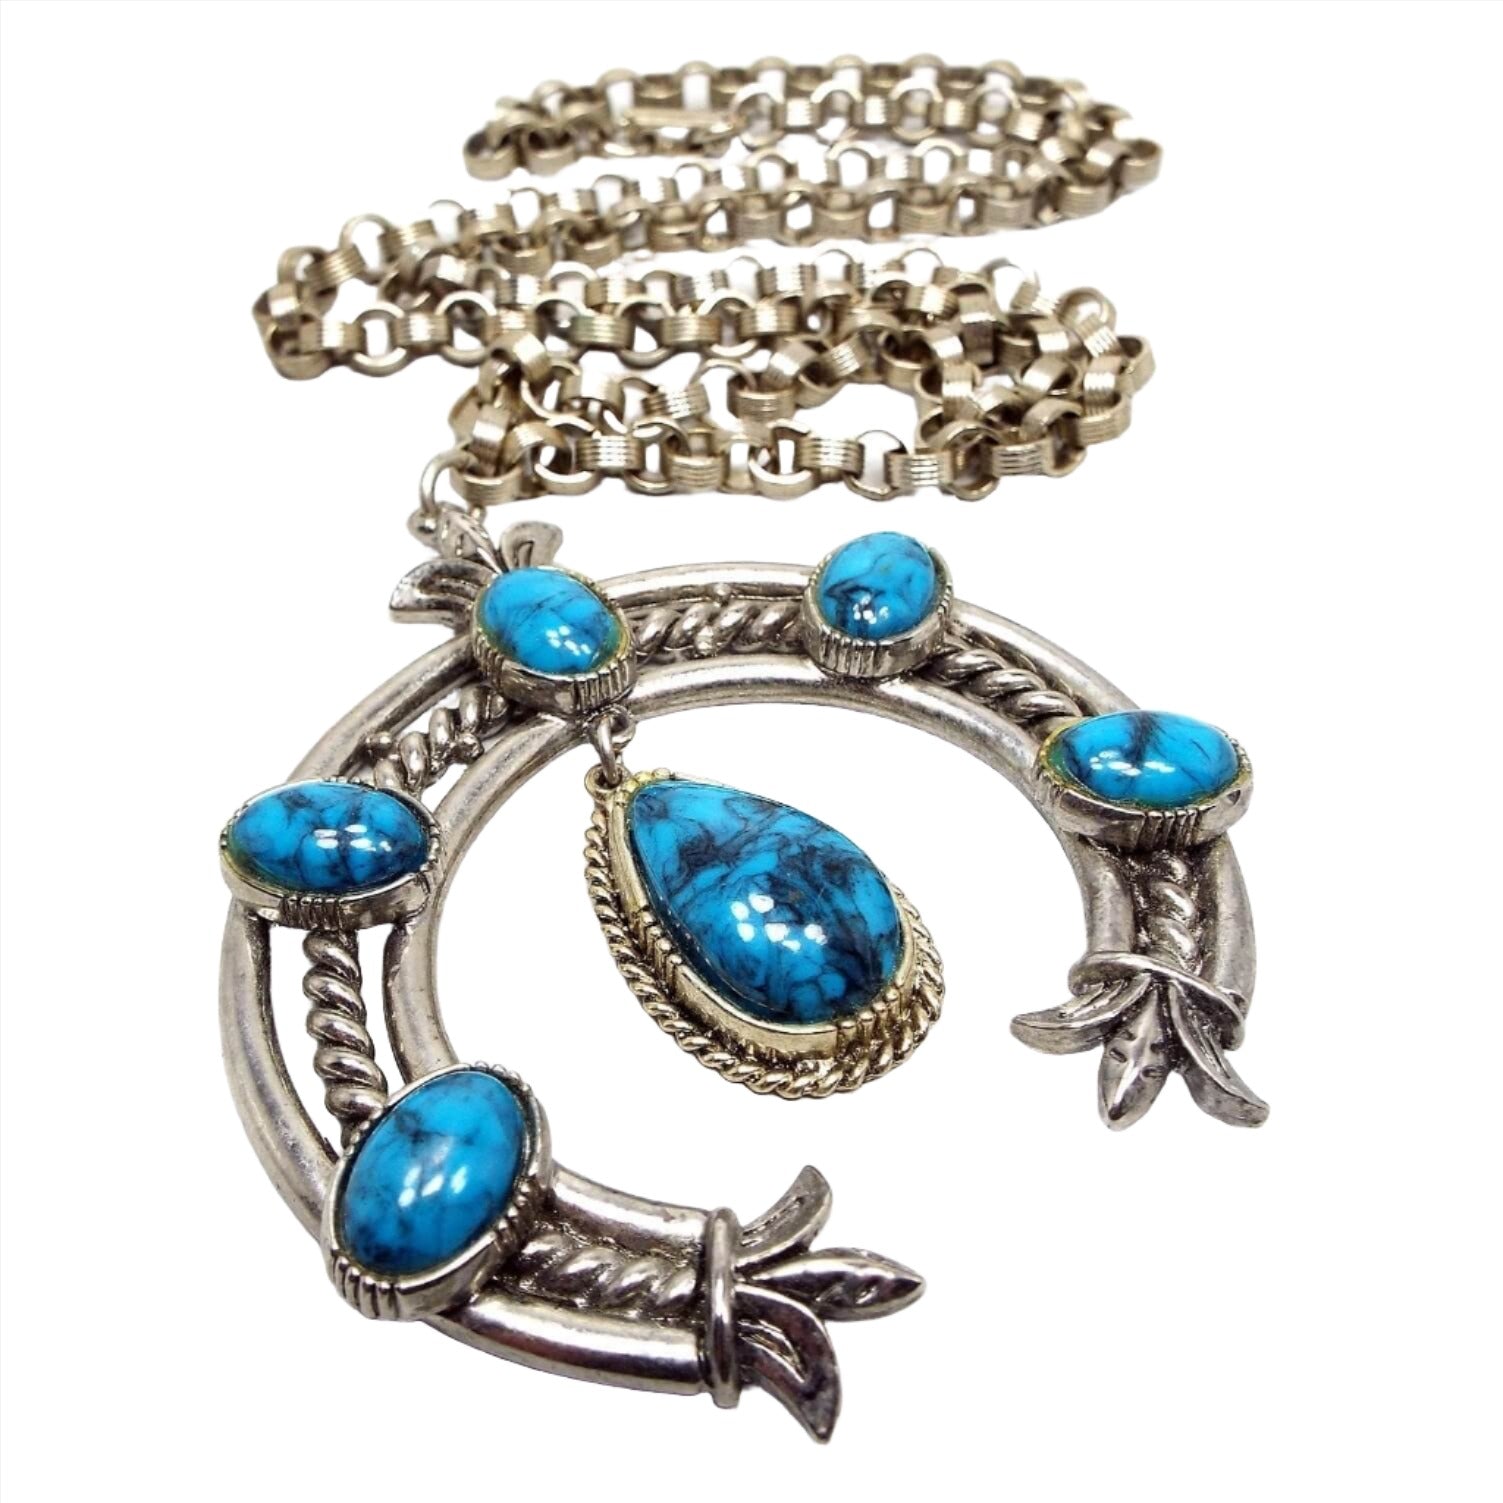 Front view of the retro vintage ART squash blossom pendant necklace. The metal is silver tone in color. The pendant has a large curved squash blossom design with oval blue and gray marbled plastic cabs. 